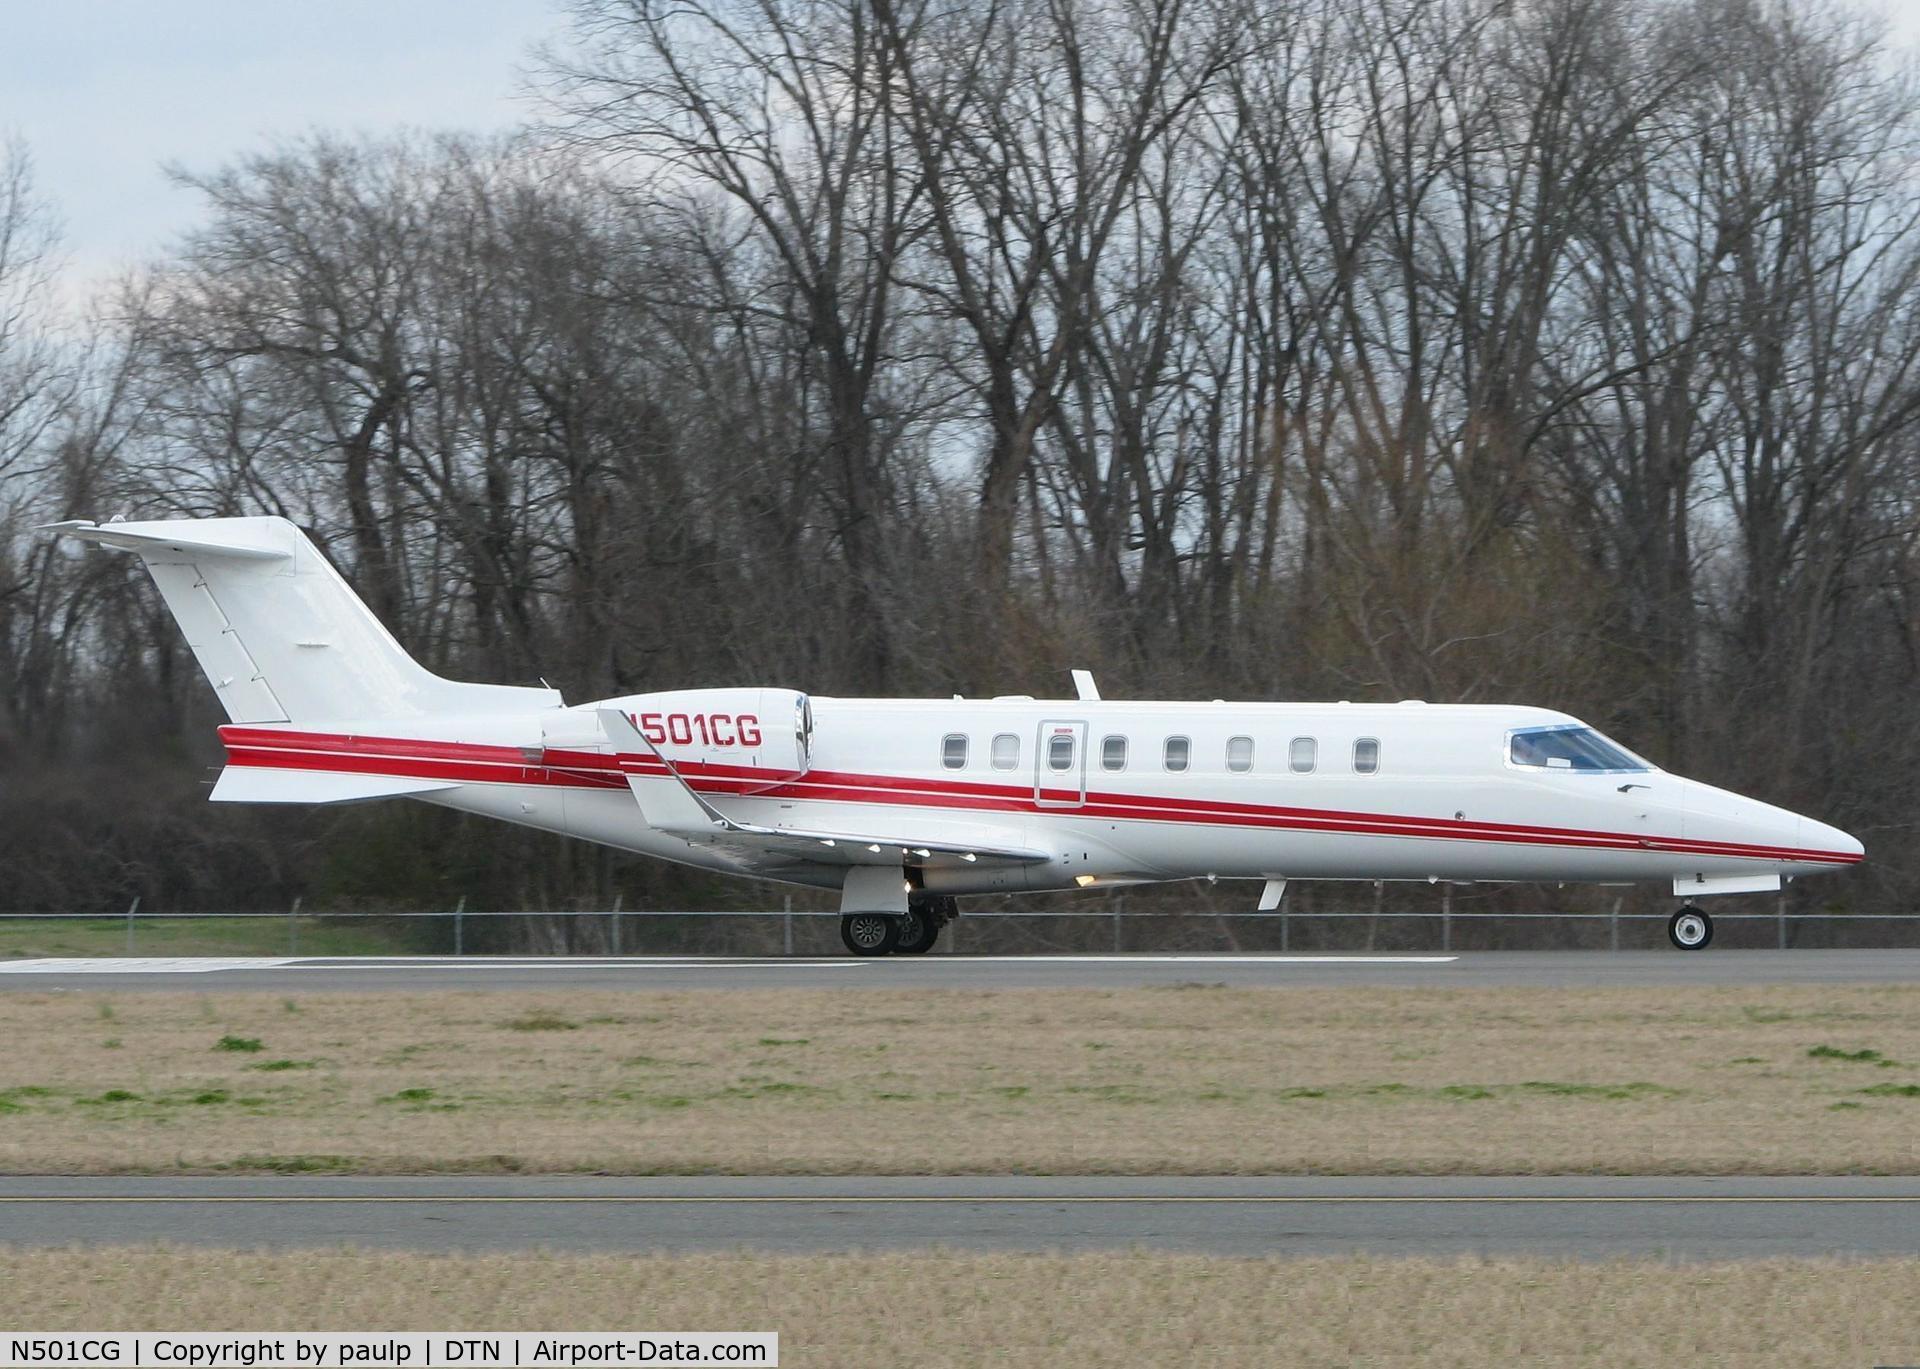 N501CG, 1999 Learjet Inc 45 C/N 040, Starting its take off roll on 14 at Downtown Shreveport.